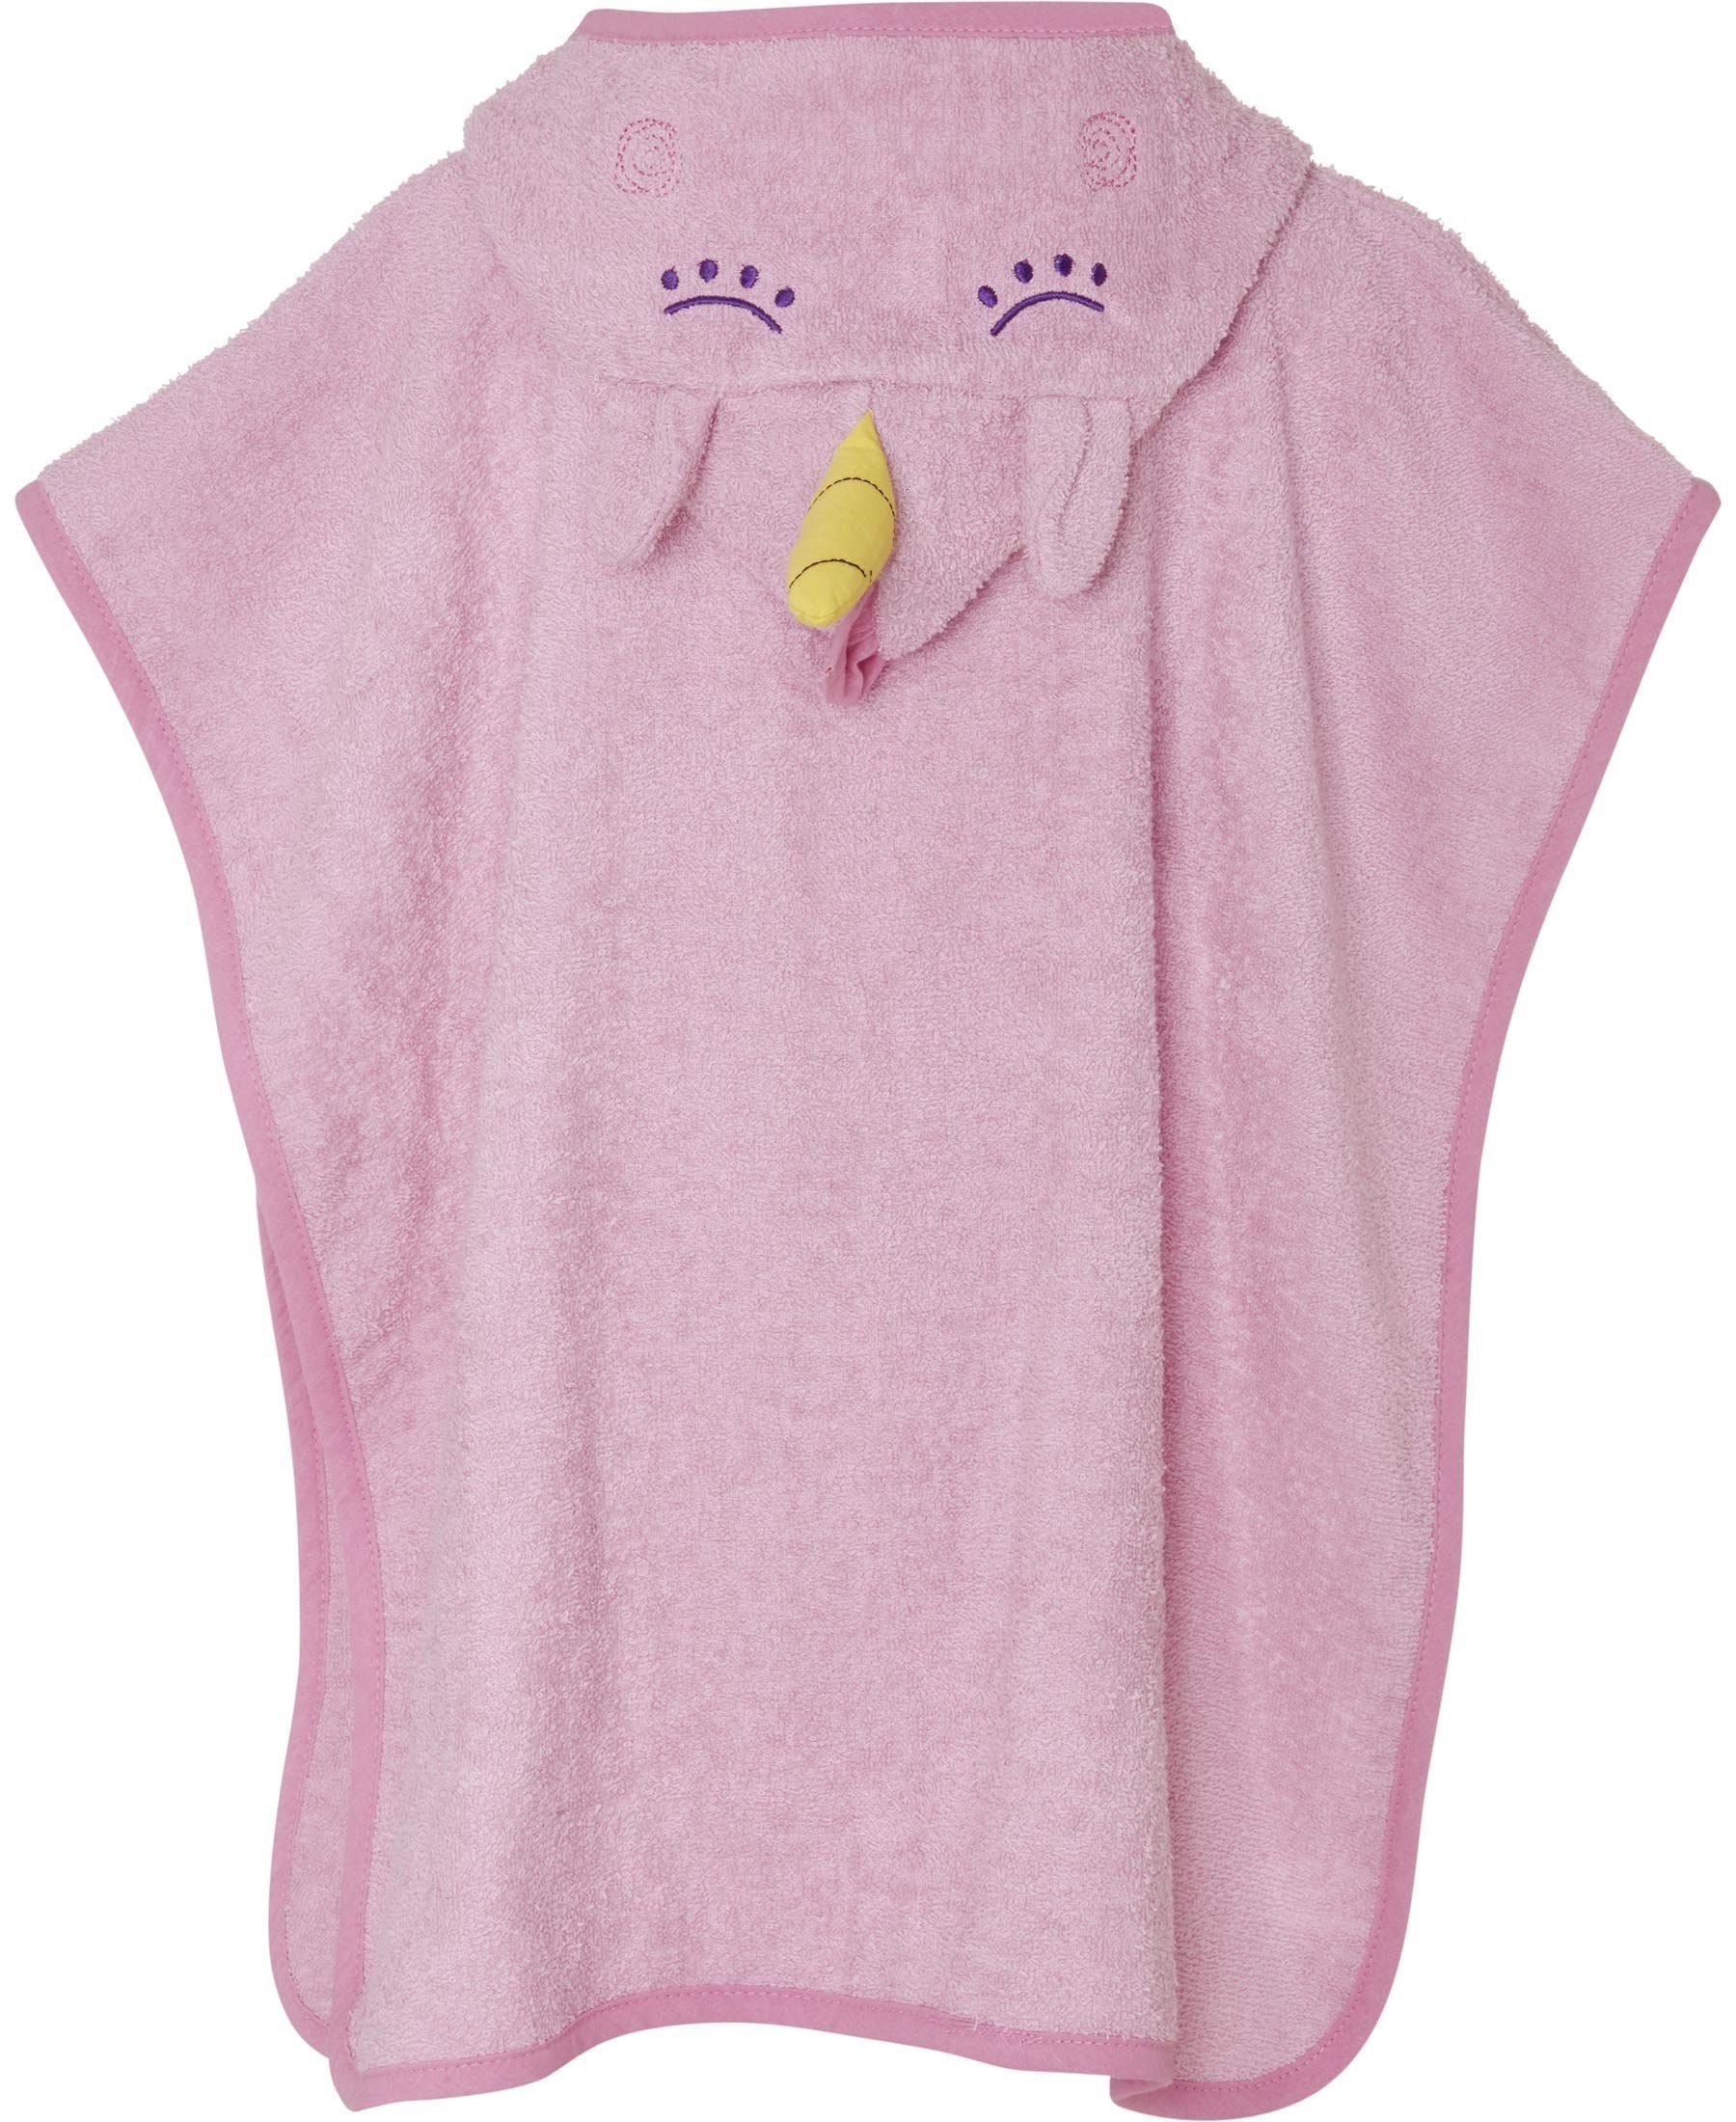 Playshoes Badeponcho Frottee-Poncho Einhorn, Baumwolle